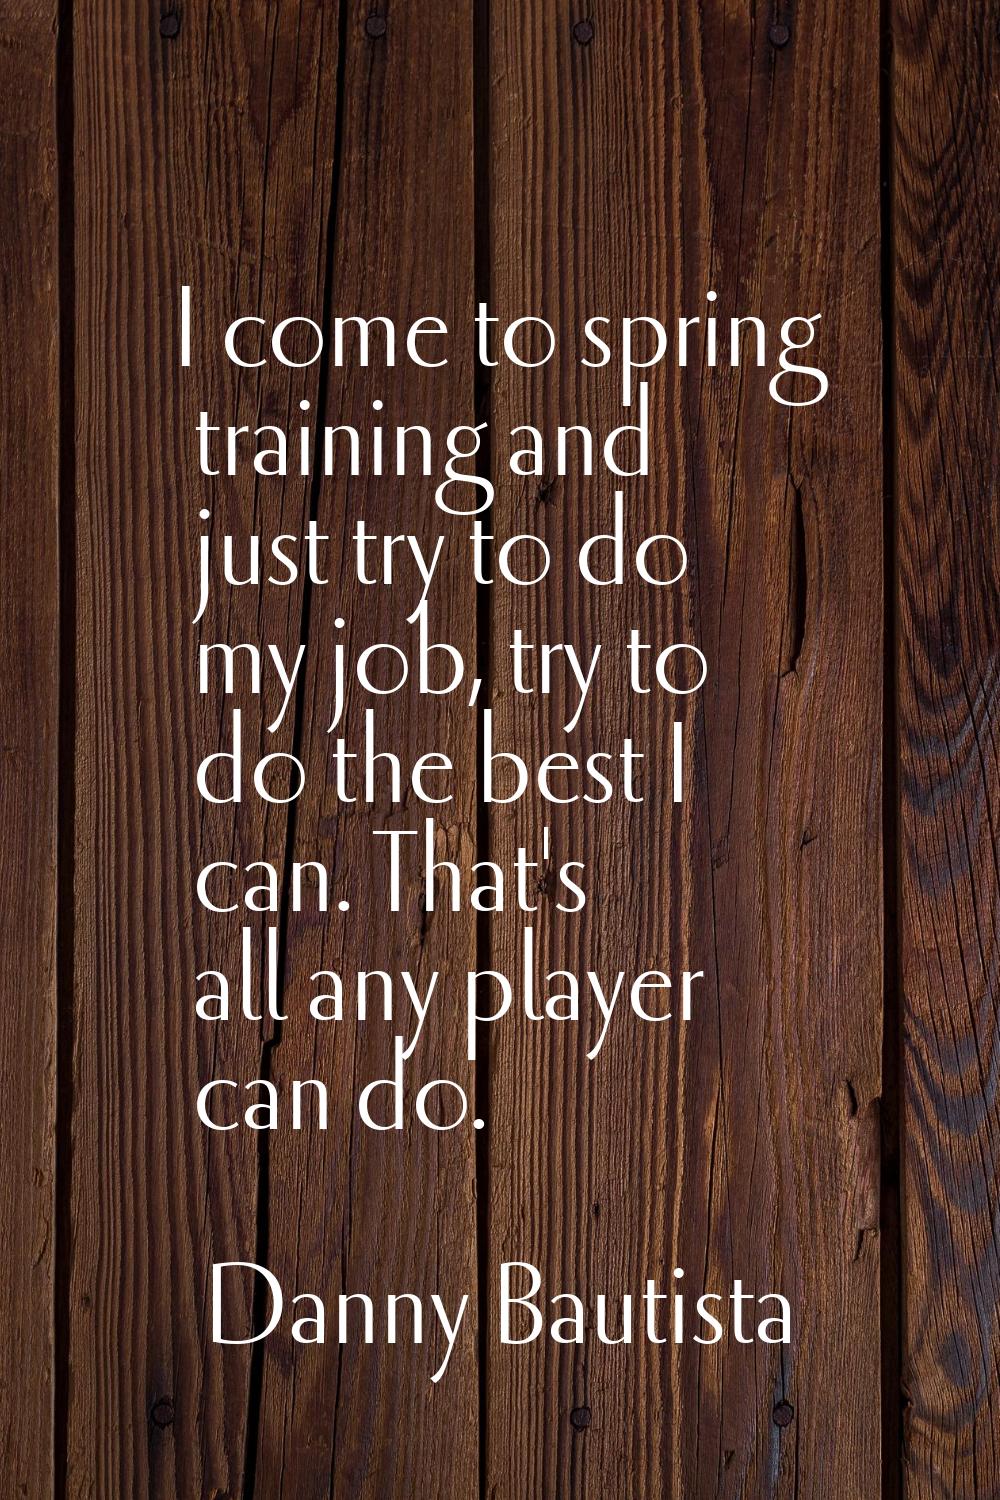 I come to spring training and just try to do my job, try to do the best I can. That's all any playe